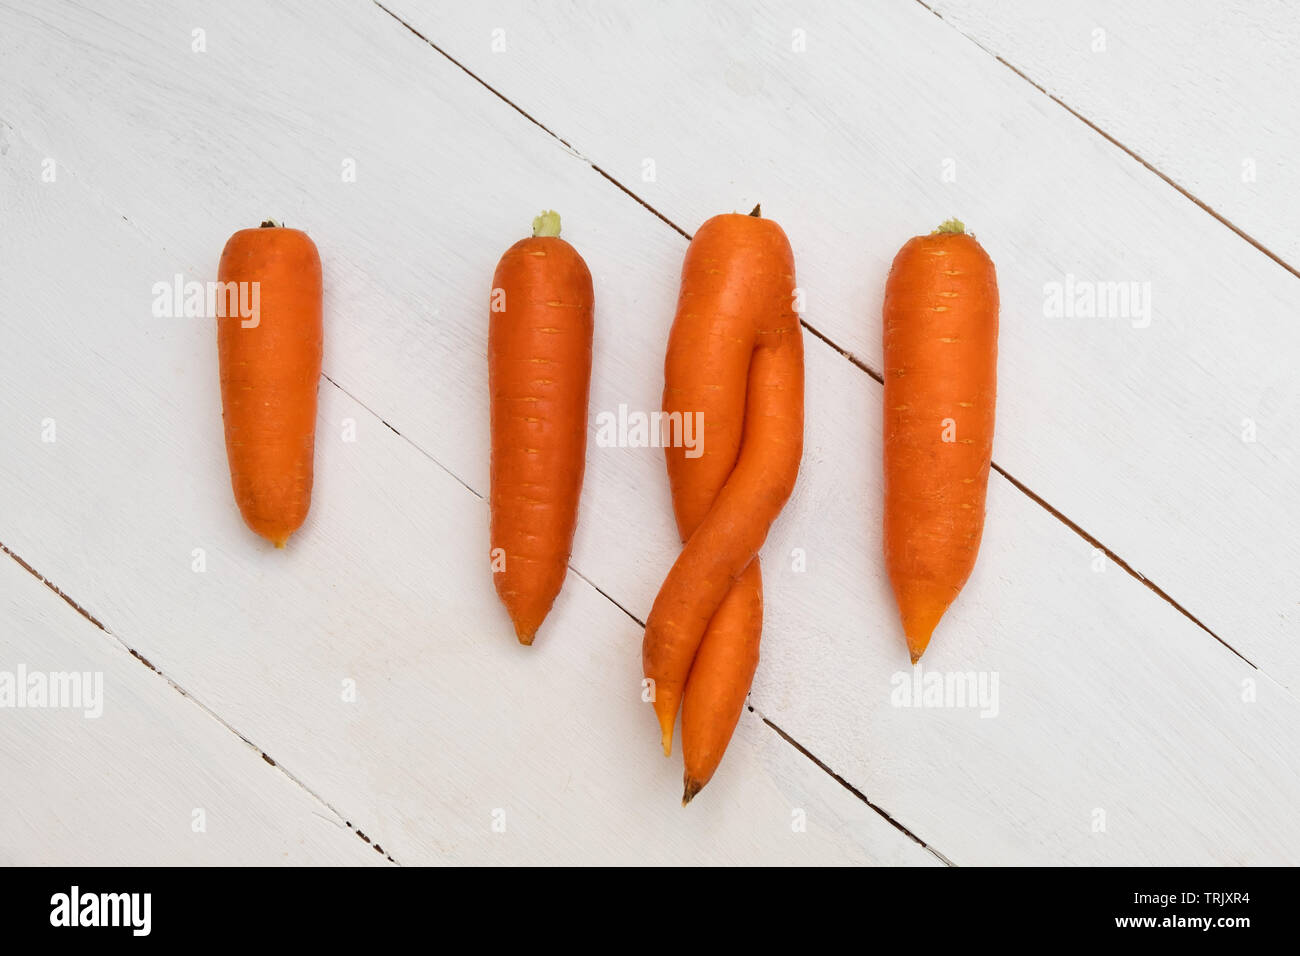 One ugly twisted carrot among 3 normal carrots on white wooden background, horizontal orientation. Stock Photo